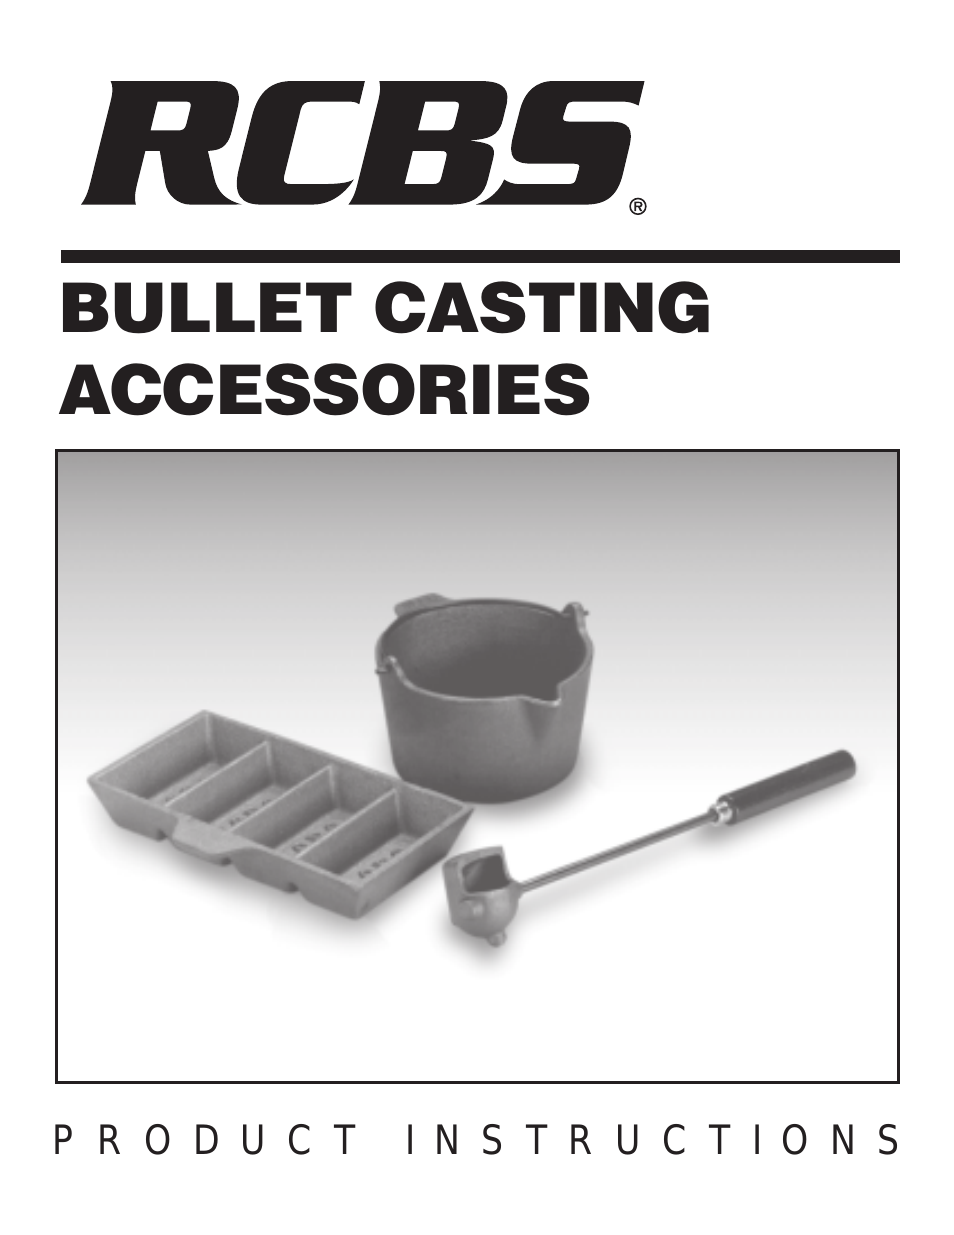 Bullet Casting Accessories